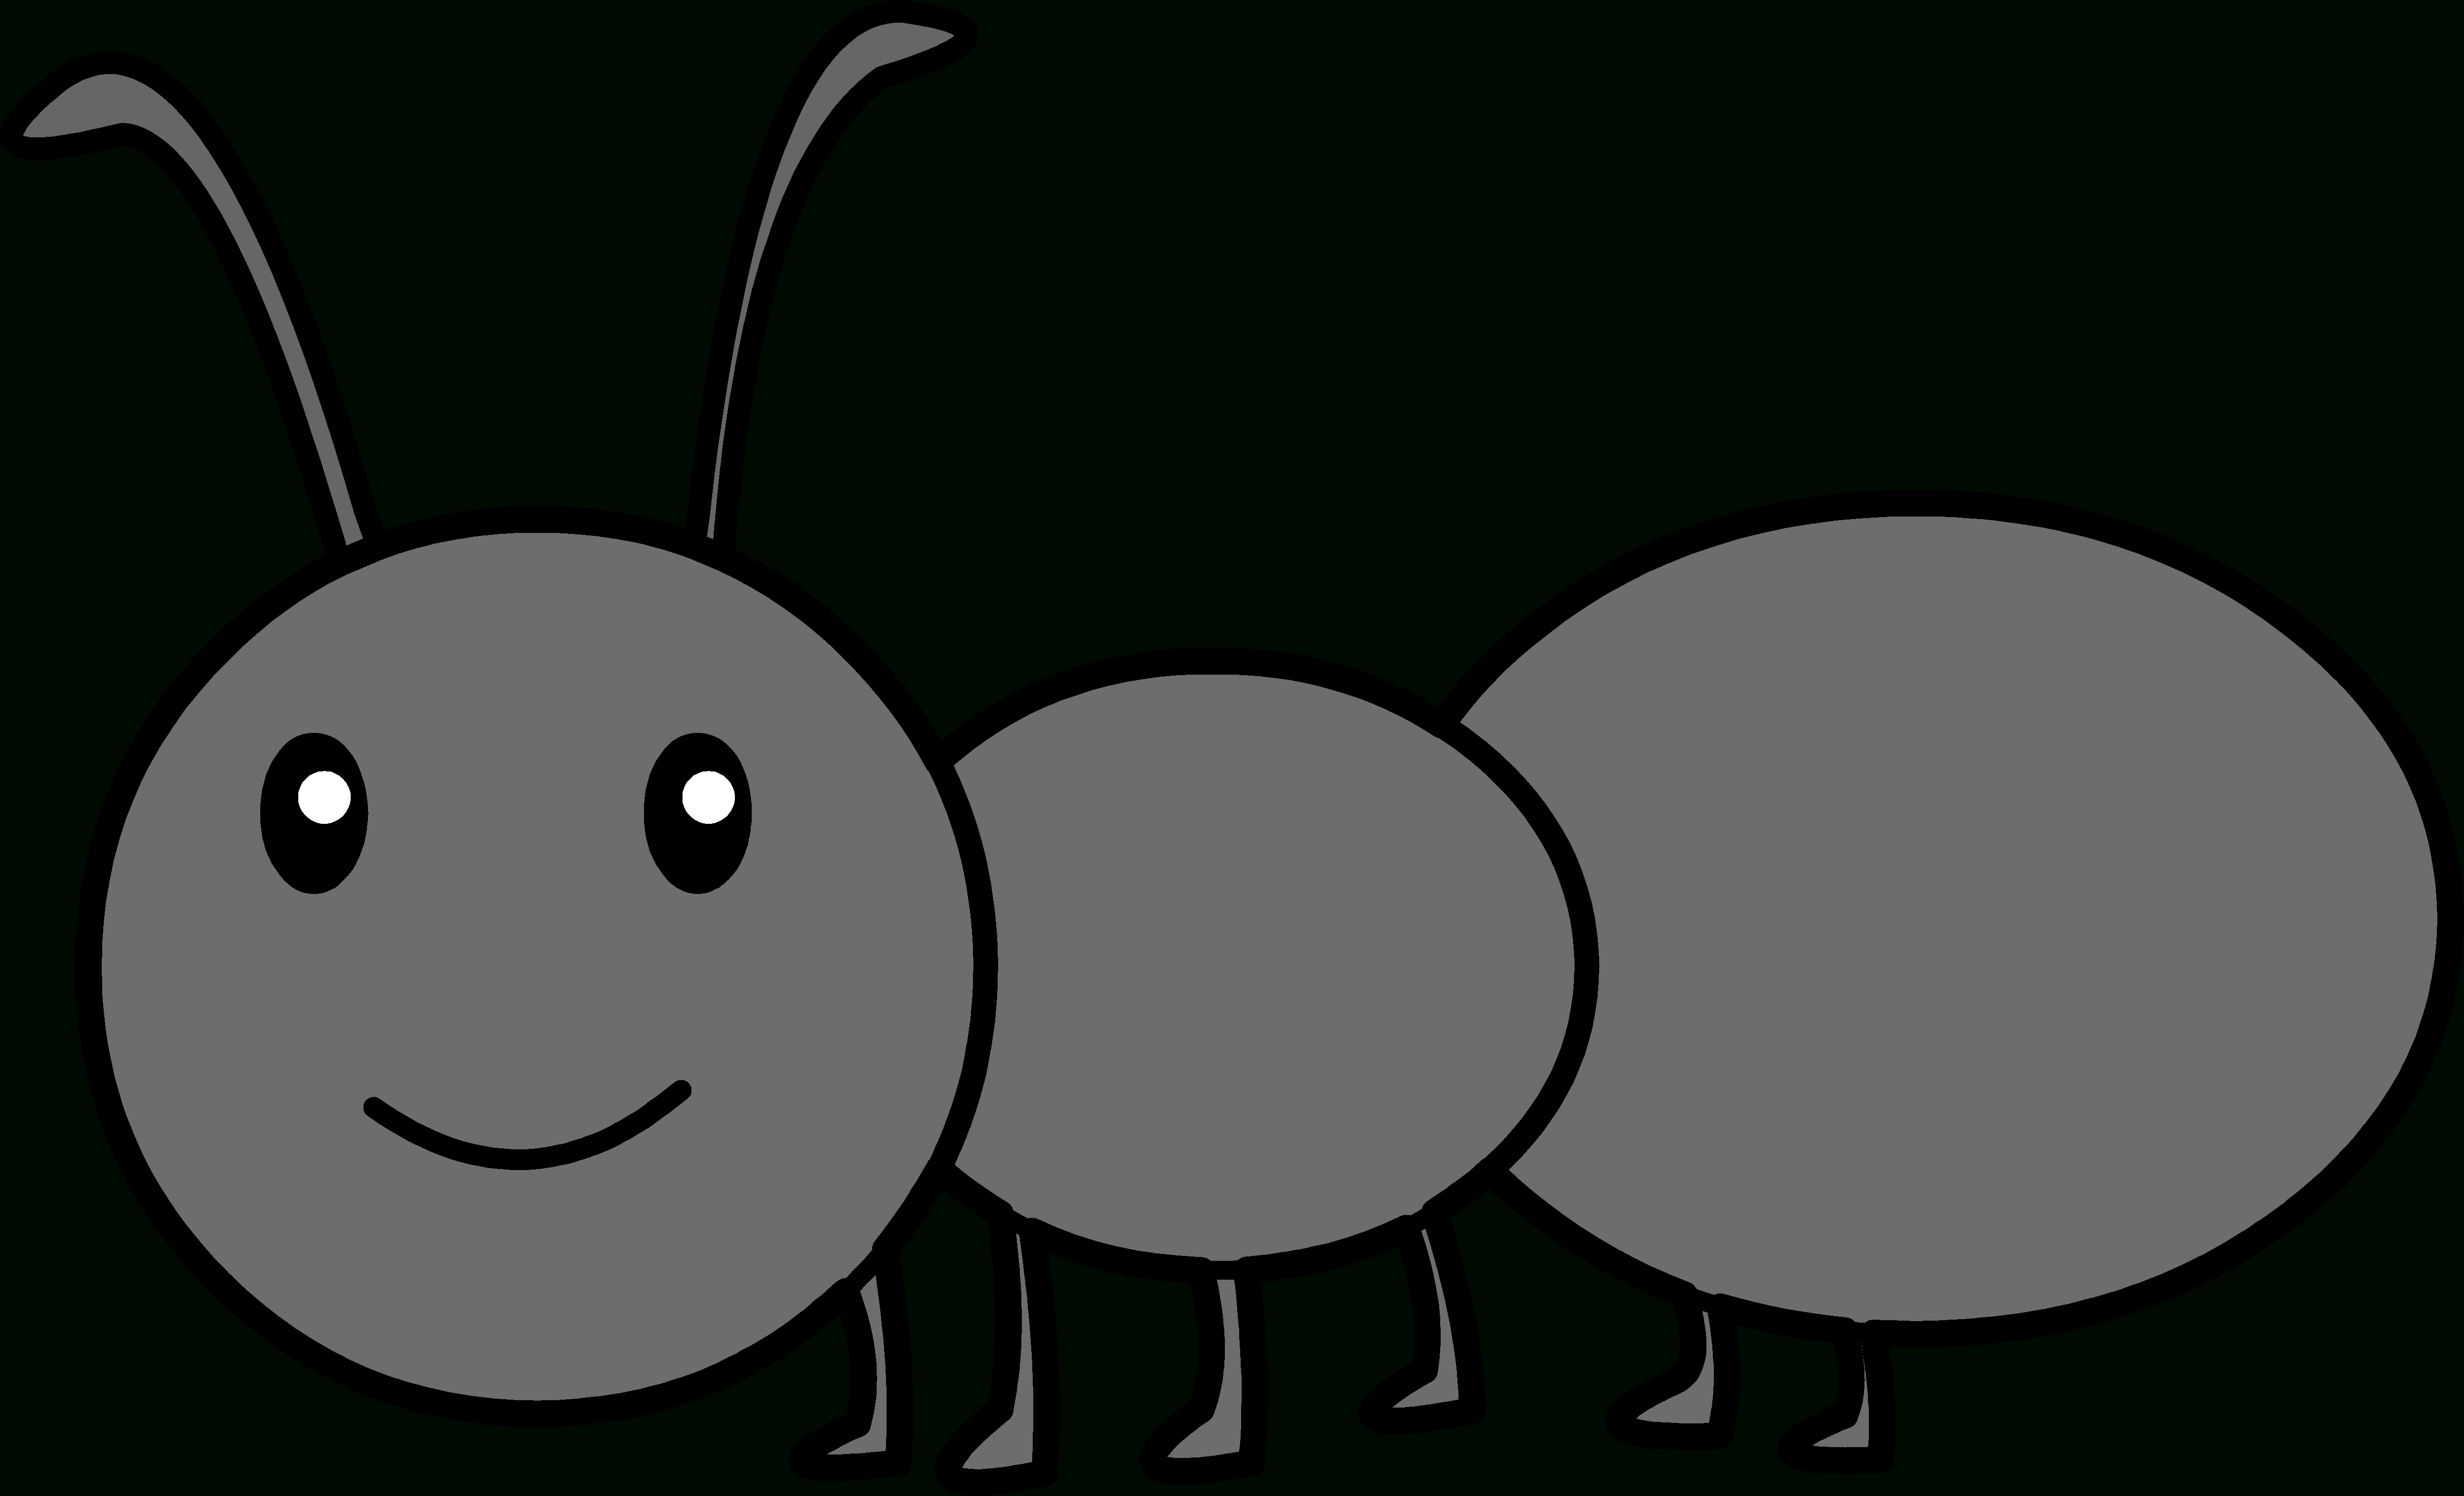 Ant clipart gray. Cute ants letters black